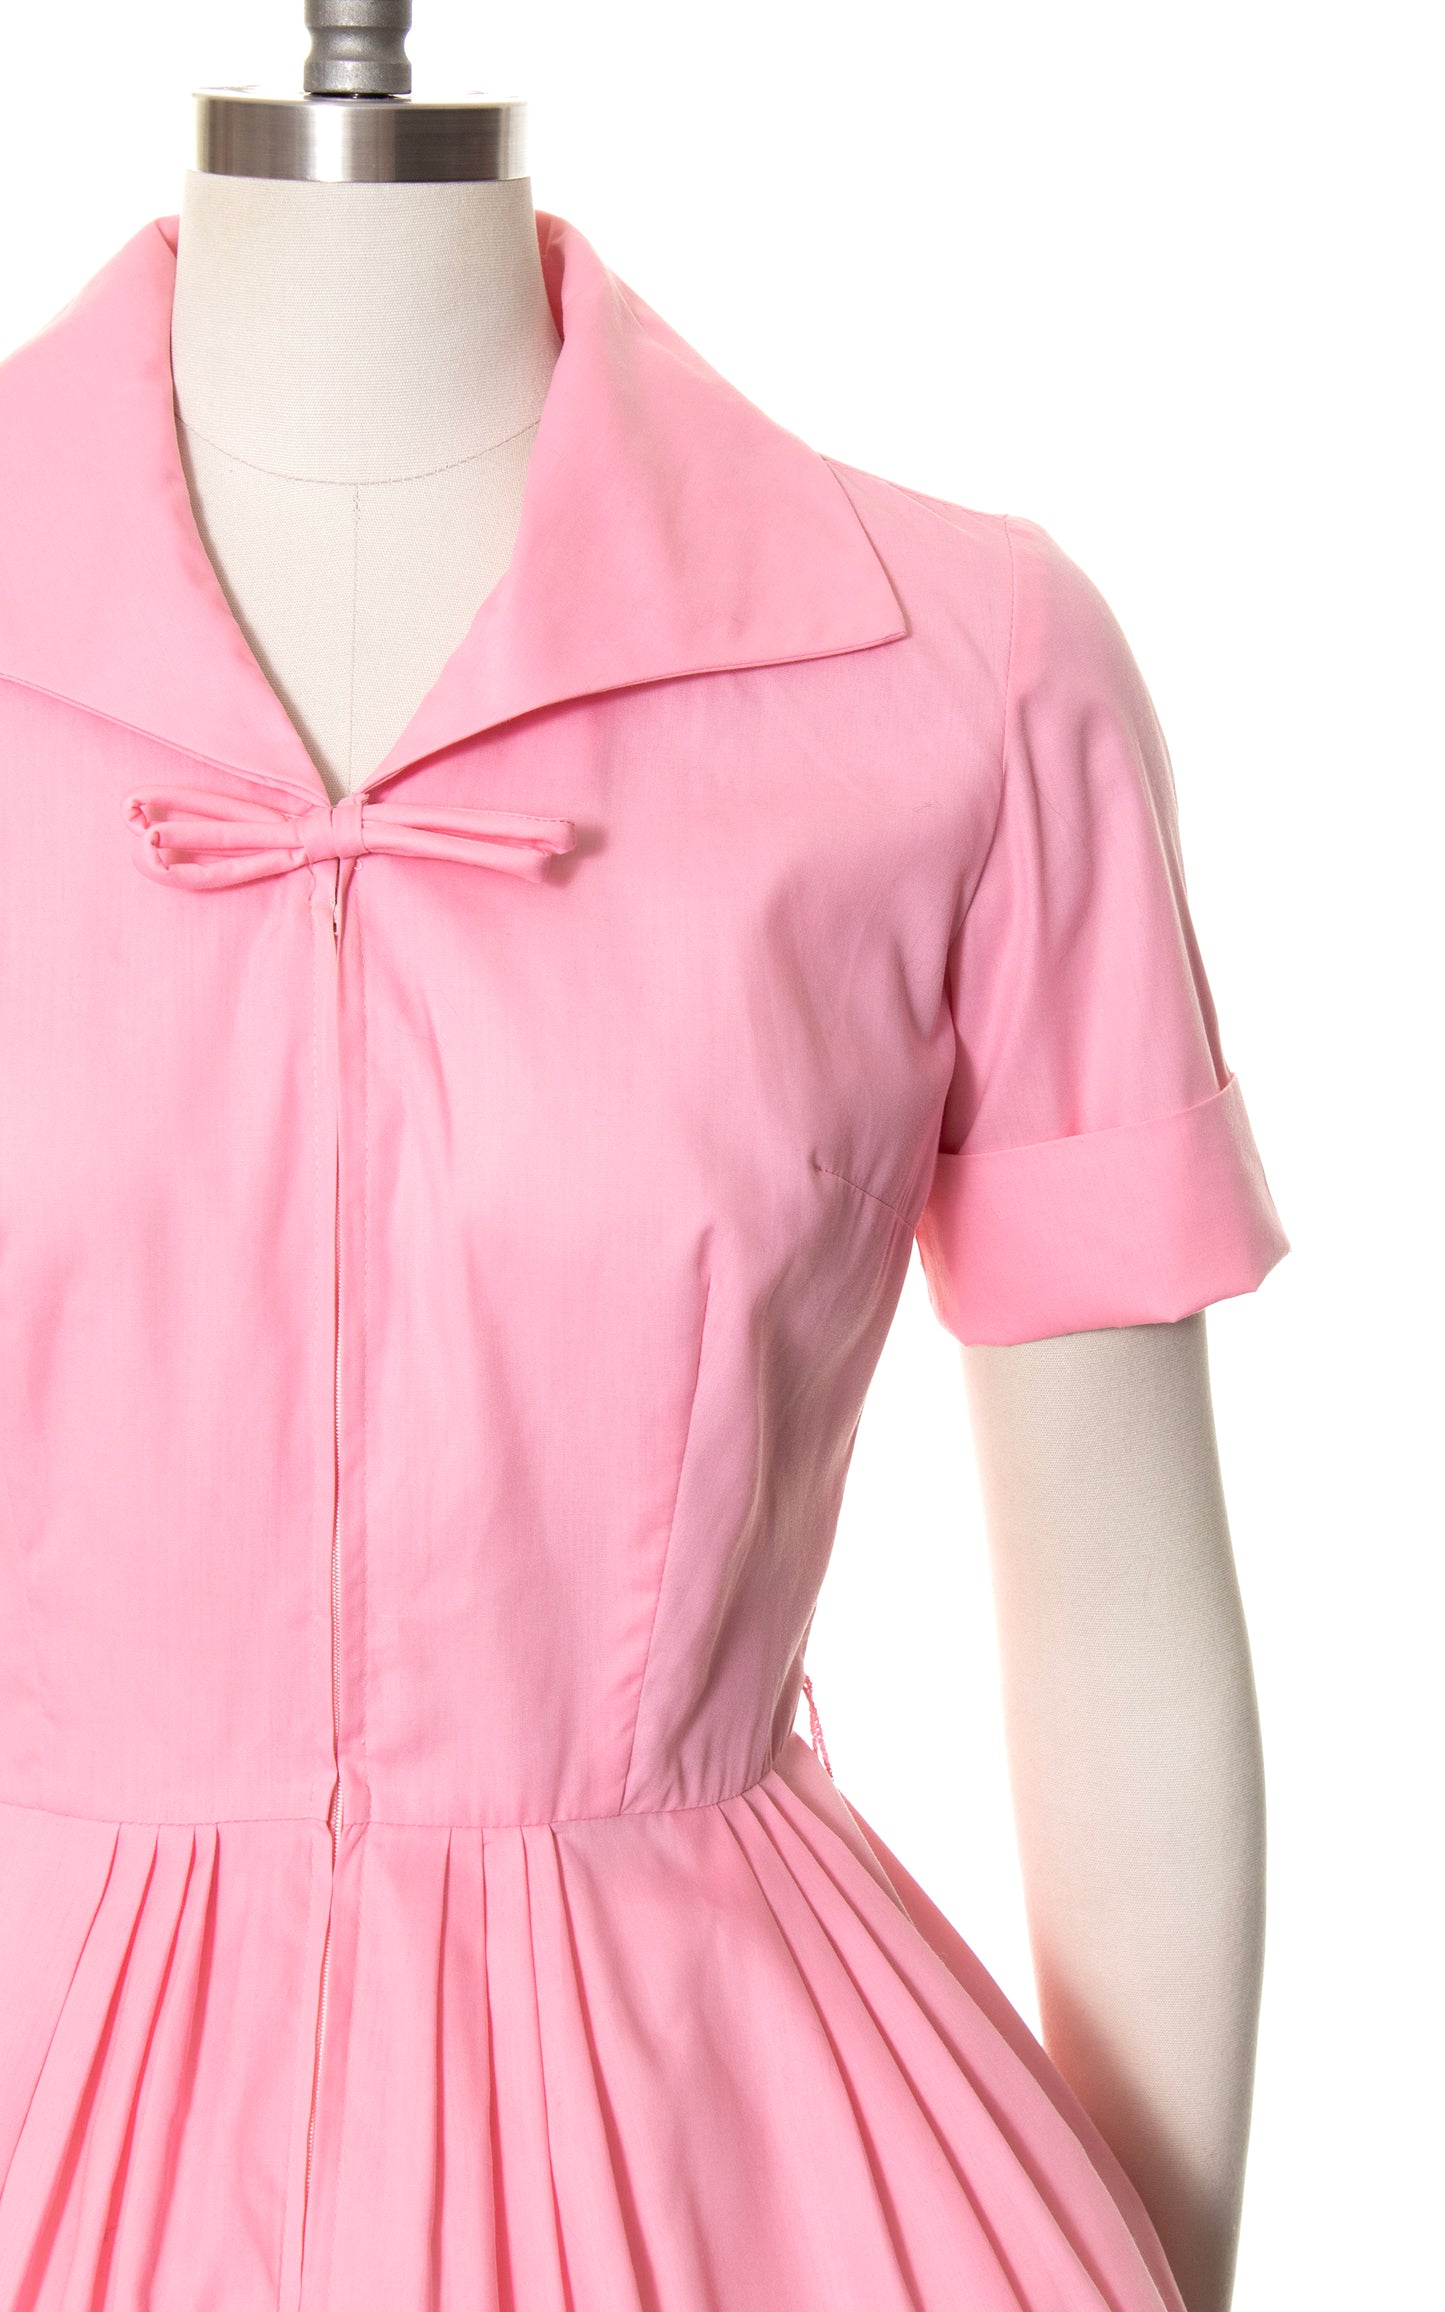 1950s Pink Cotton Day Dress | small